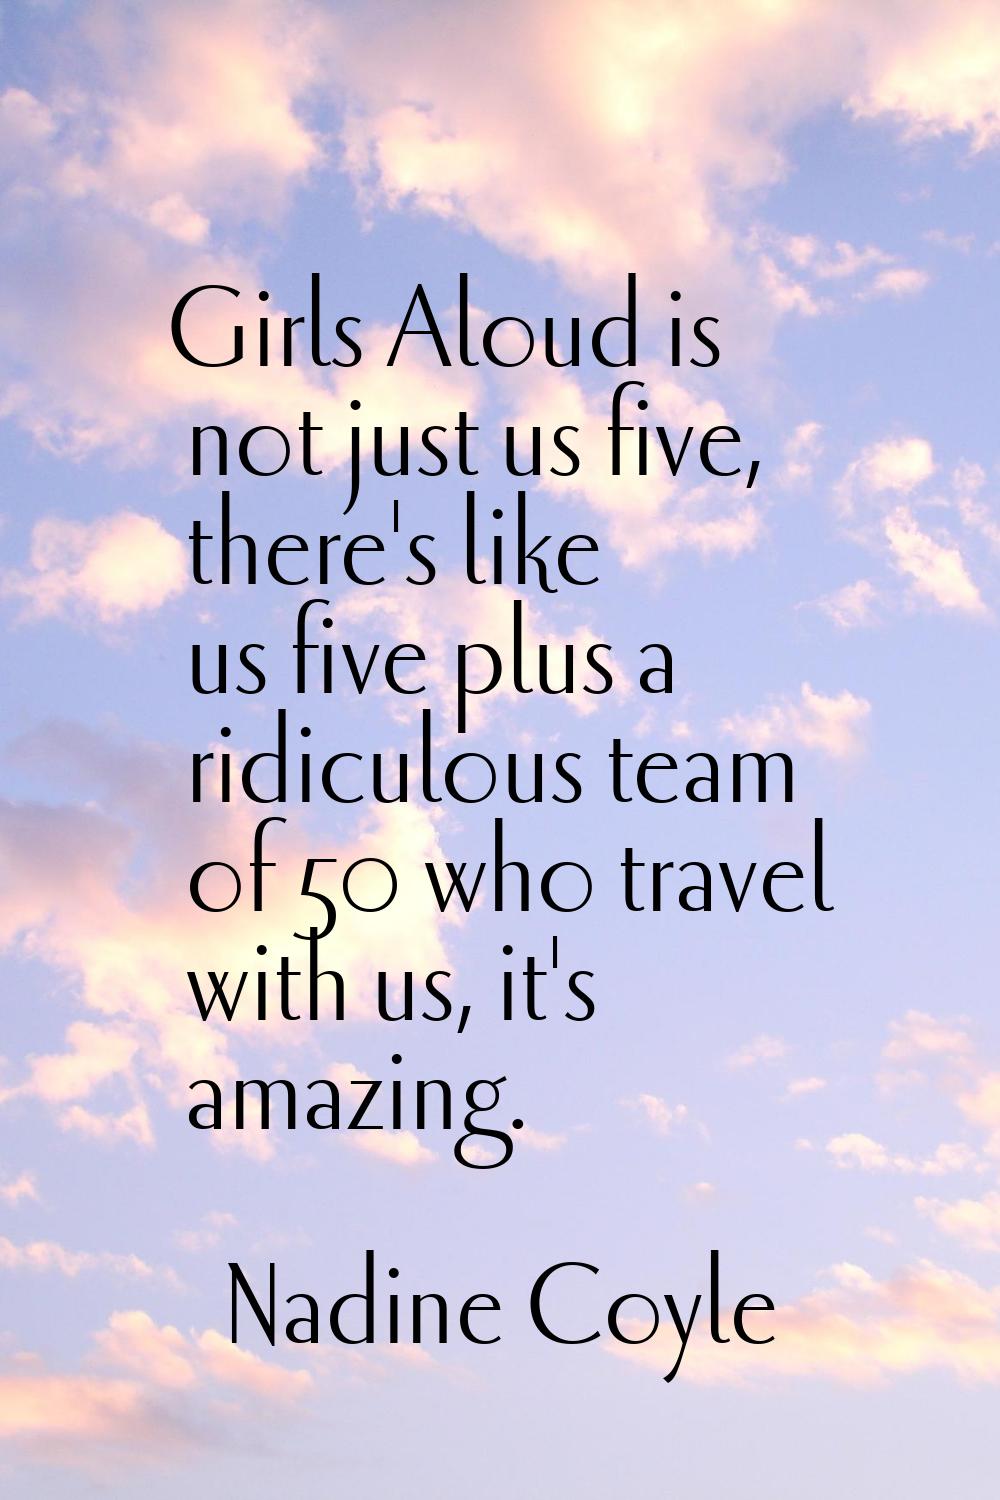 Girls Aloud is not just us five, there's like us five plus a ridiculous team of 50 who travel with 